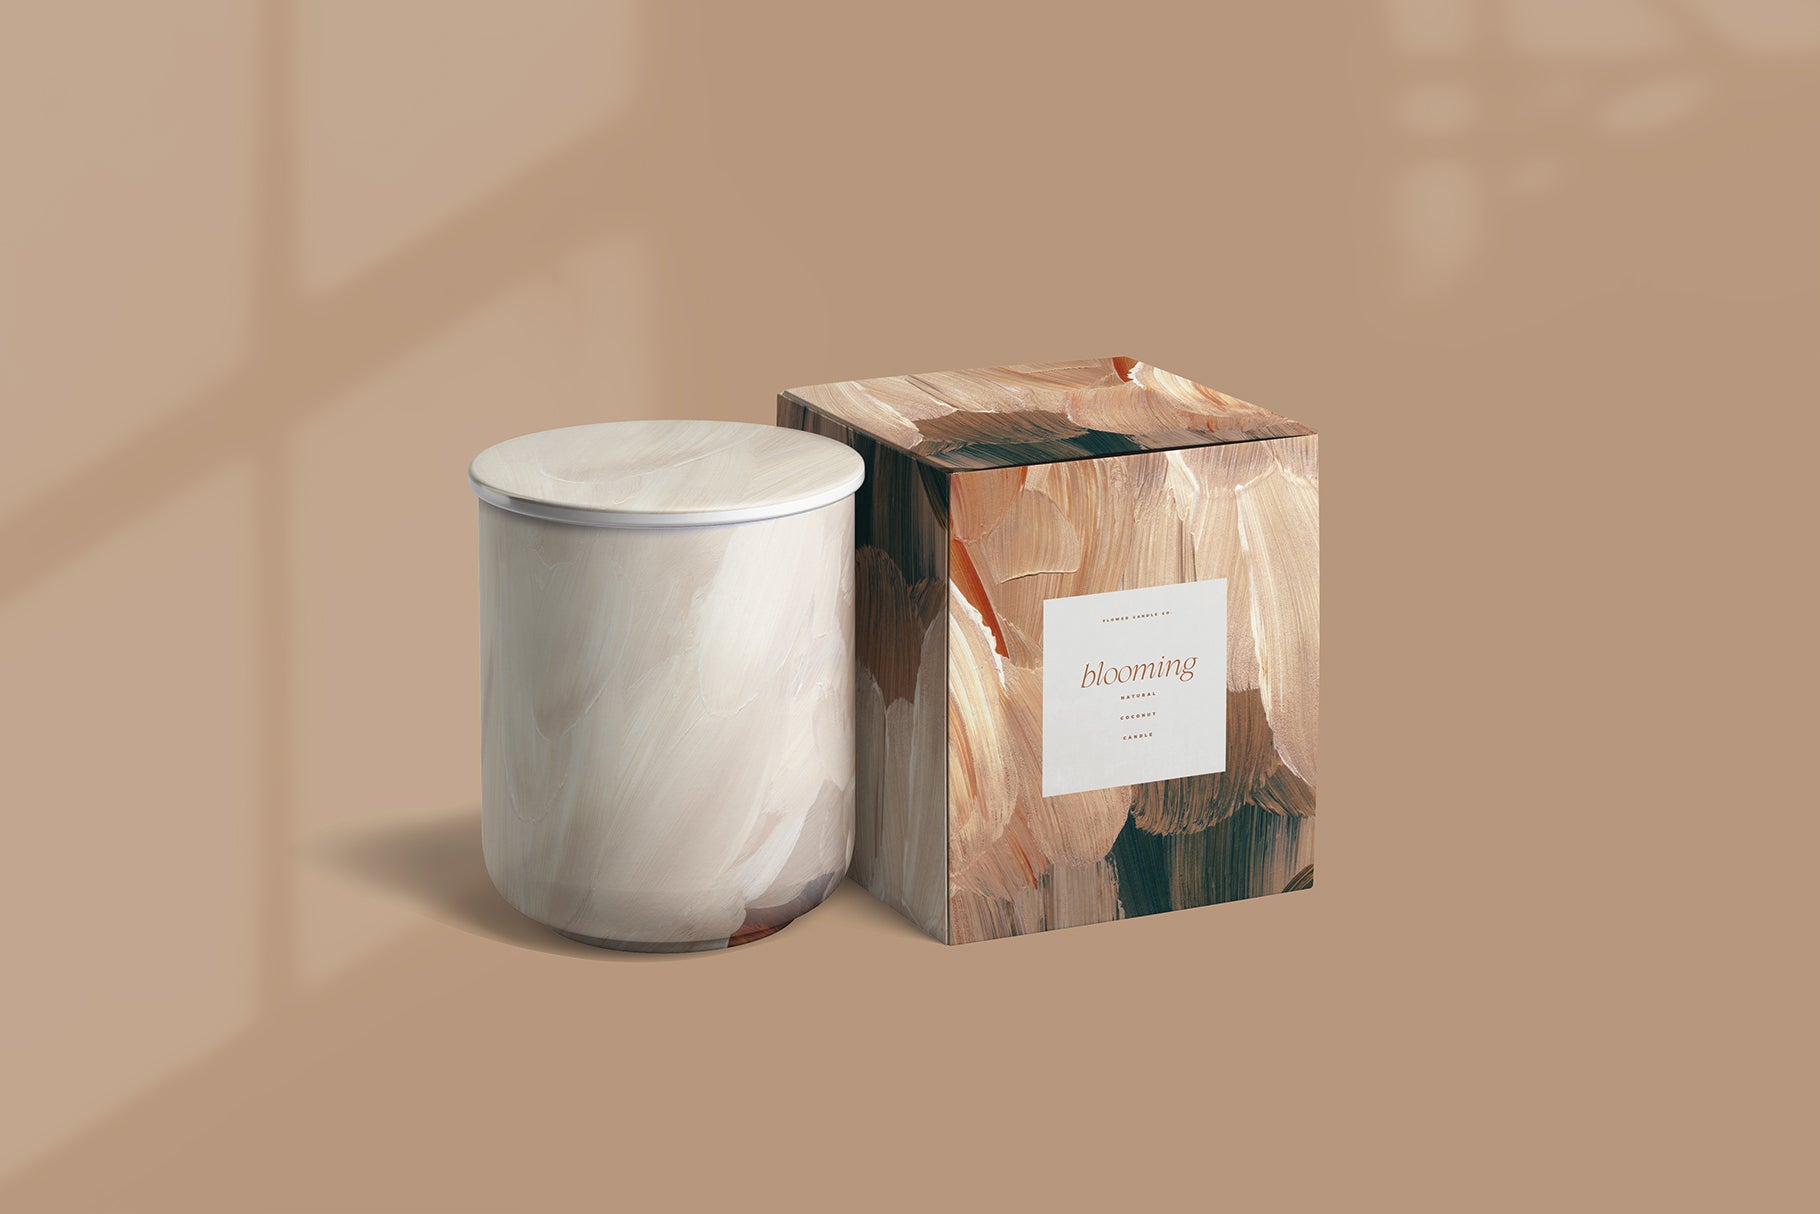 elegant candle packaging design with artistic elements